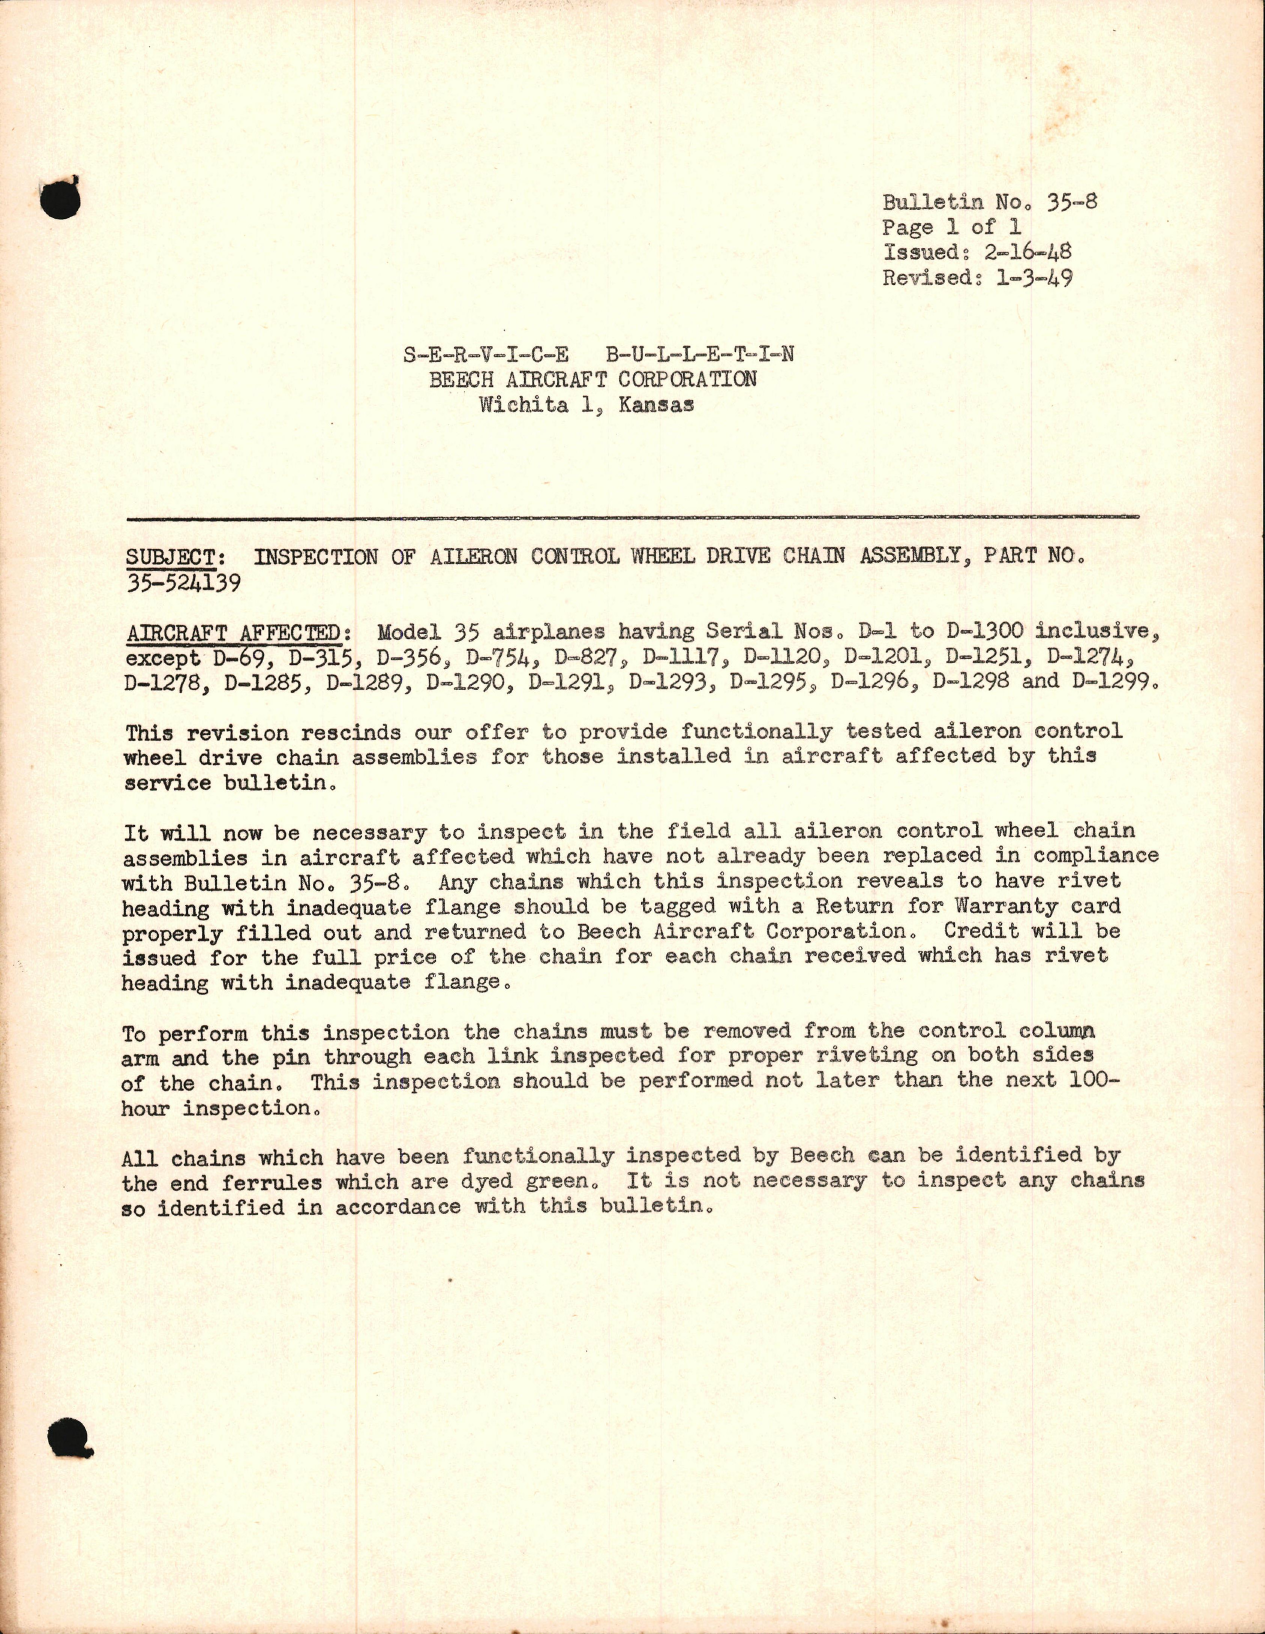 Sample page 1 from AirCorps Library document: Inspection of Aileron Control Wheel Drive Chain Assembly, Part No. 35-524139